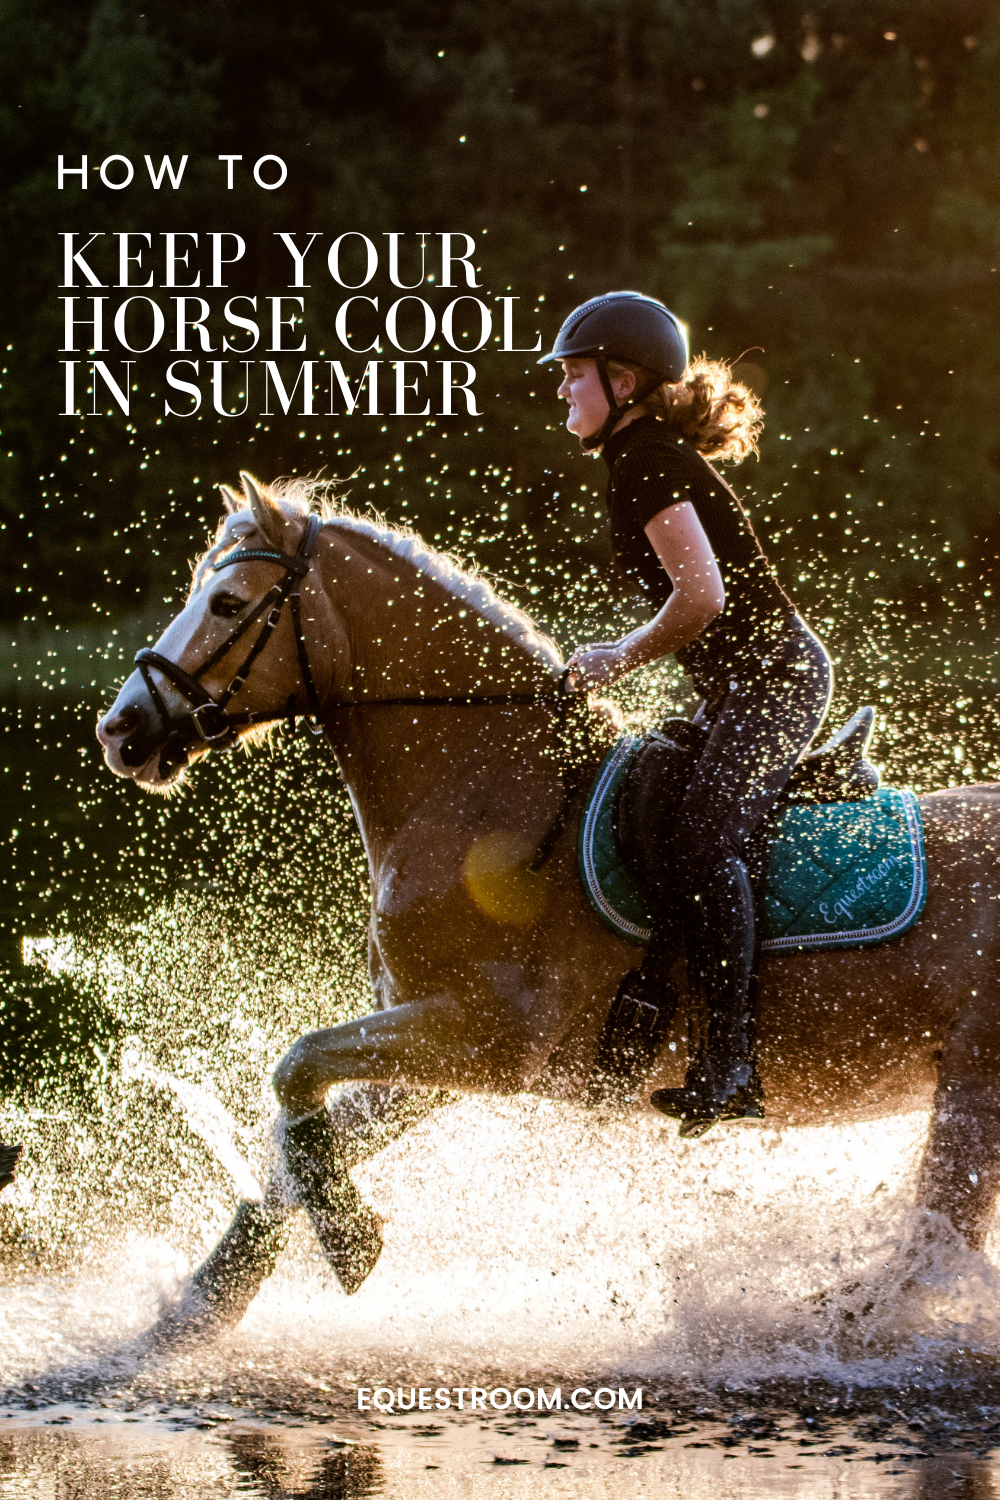 KEEPING YOUR HORSE COOL IN SUMMER 